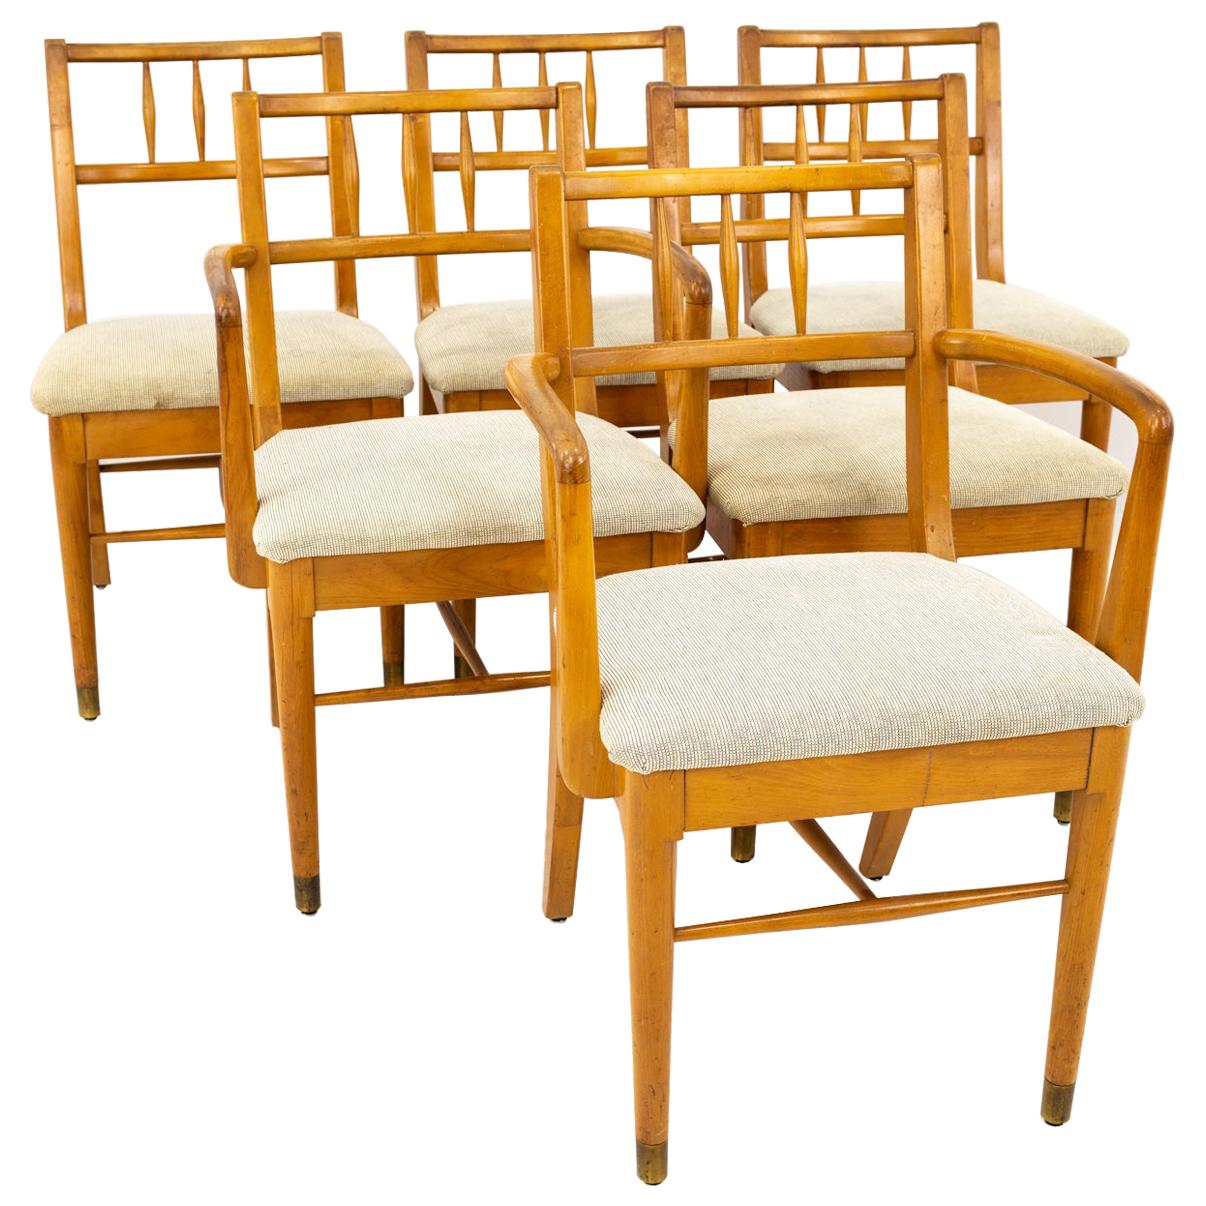 Milo Baughman for Drexel Todays Living Midcentury Blonde Dining Chairs, Set of 6